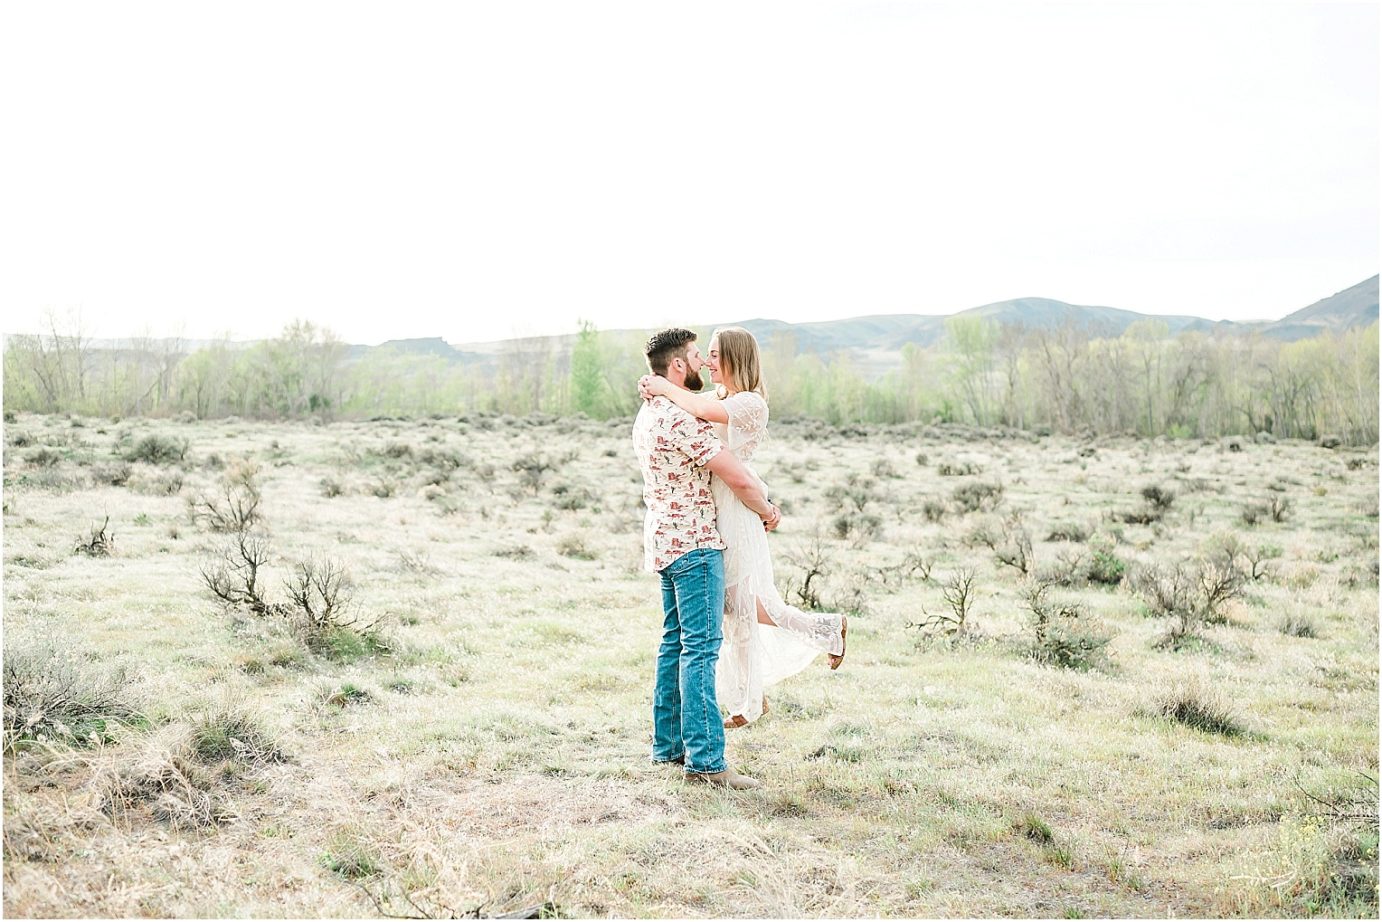 eastern washington engagement session PNW photographer Travis and arianna dancing in a field